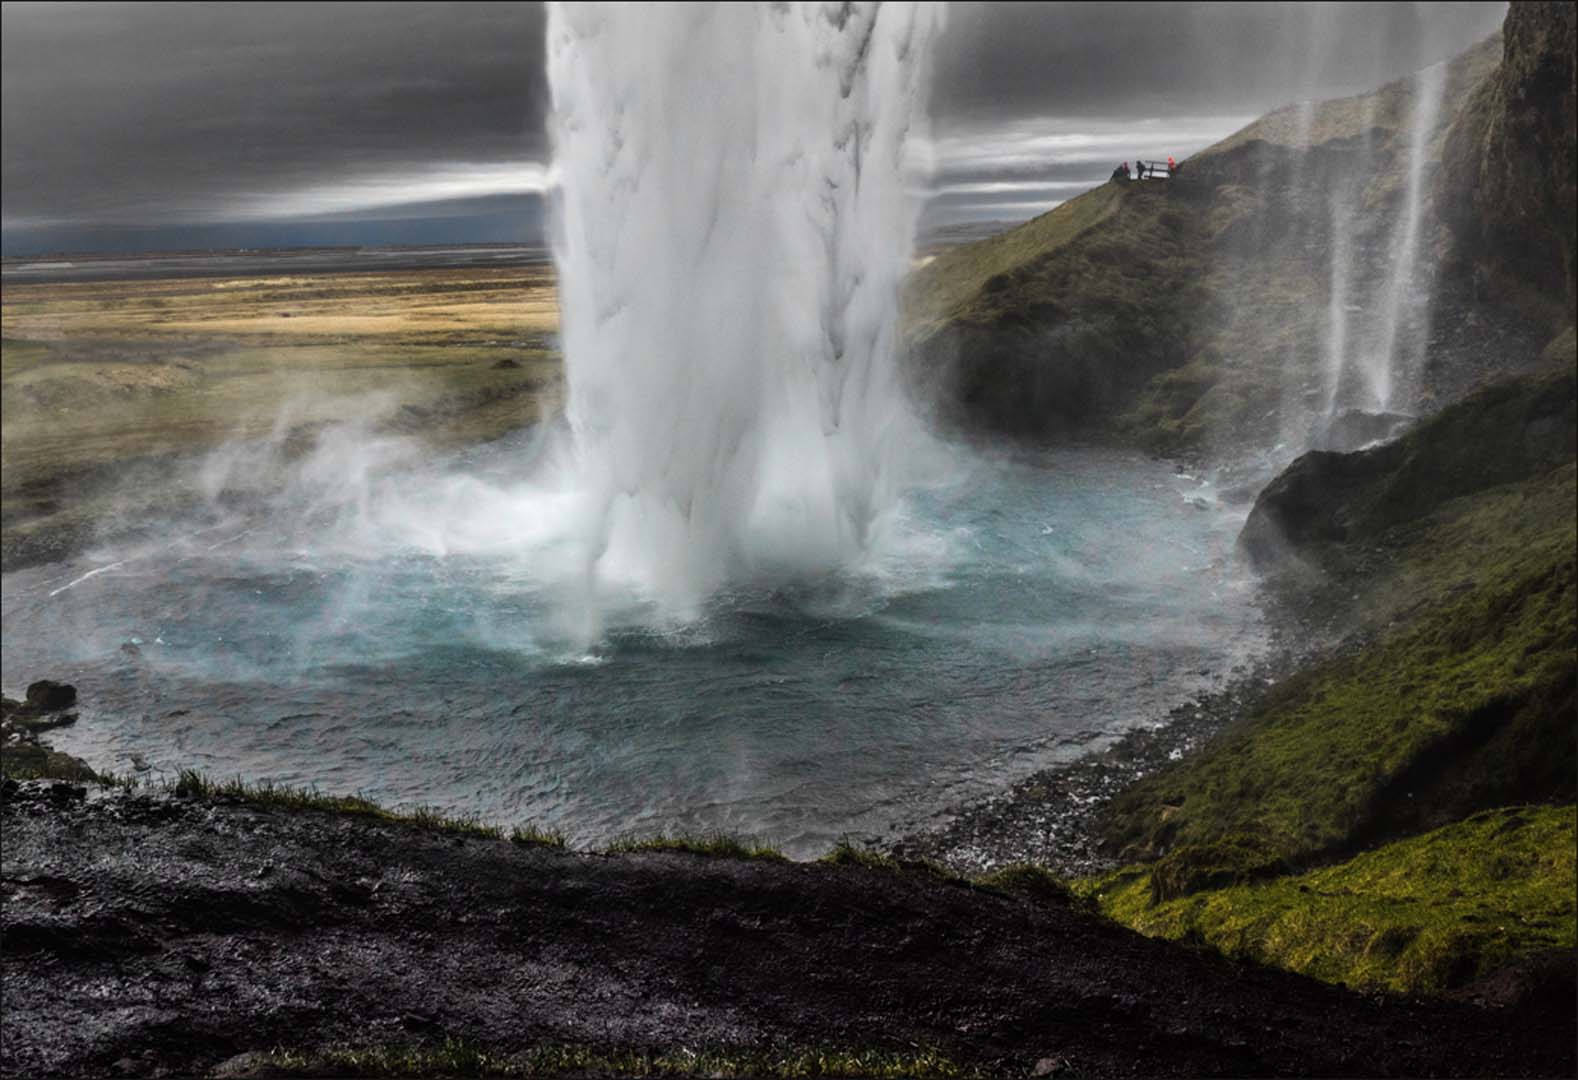 Top 10 Waterfalls in Iceland